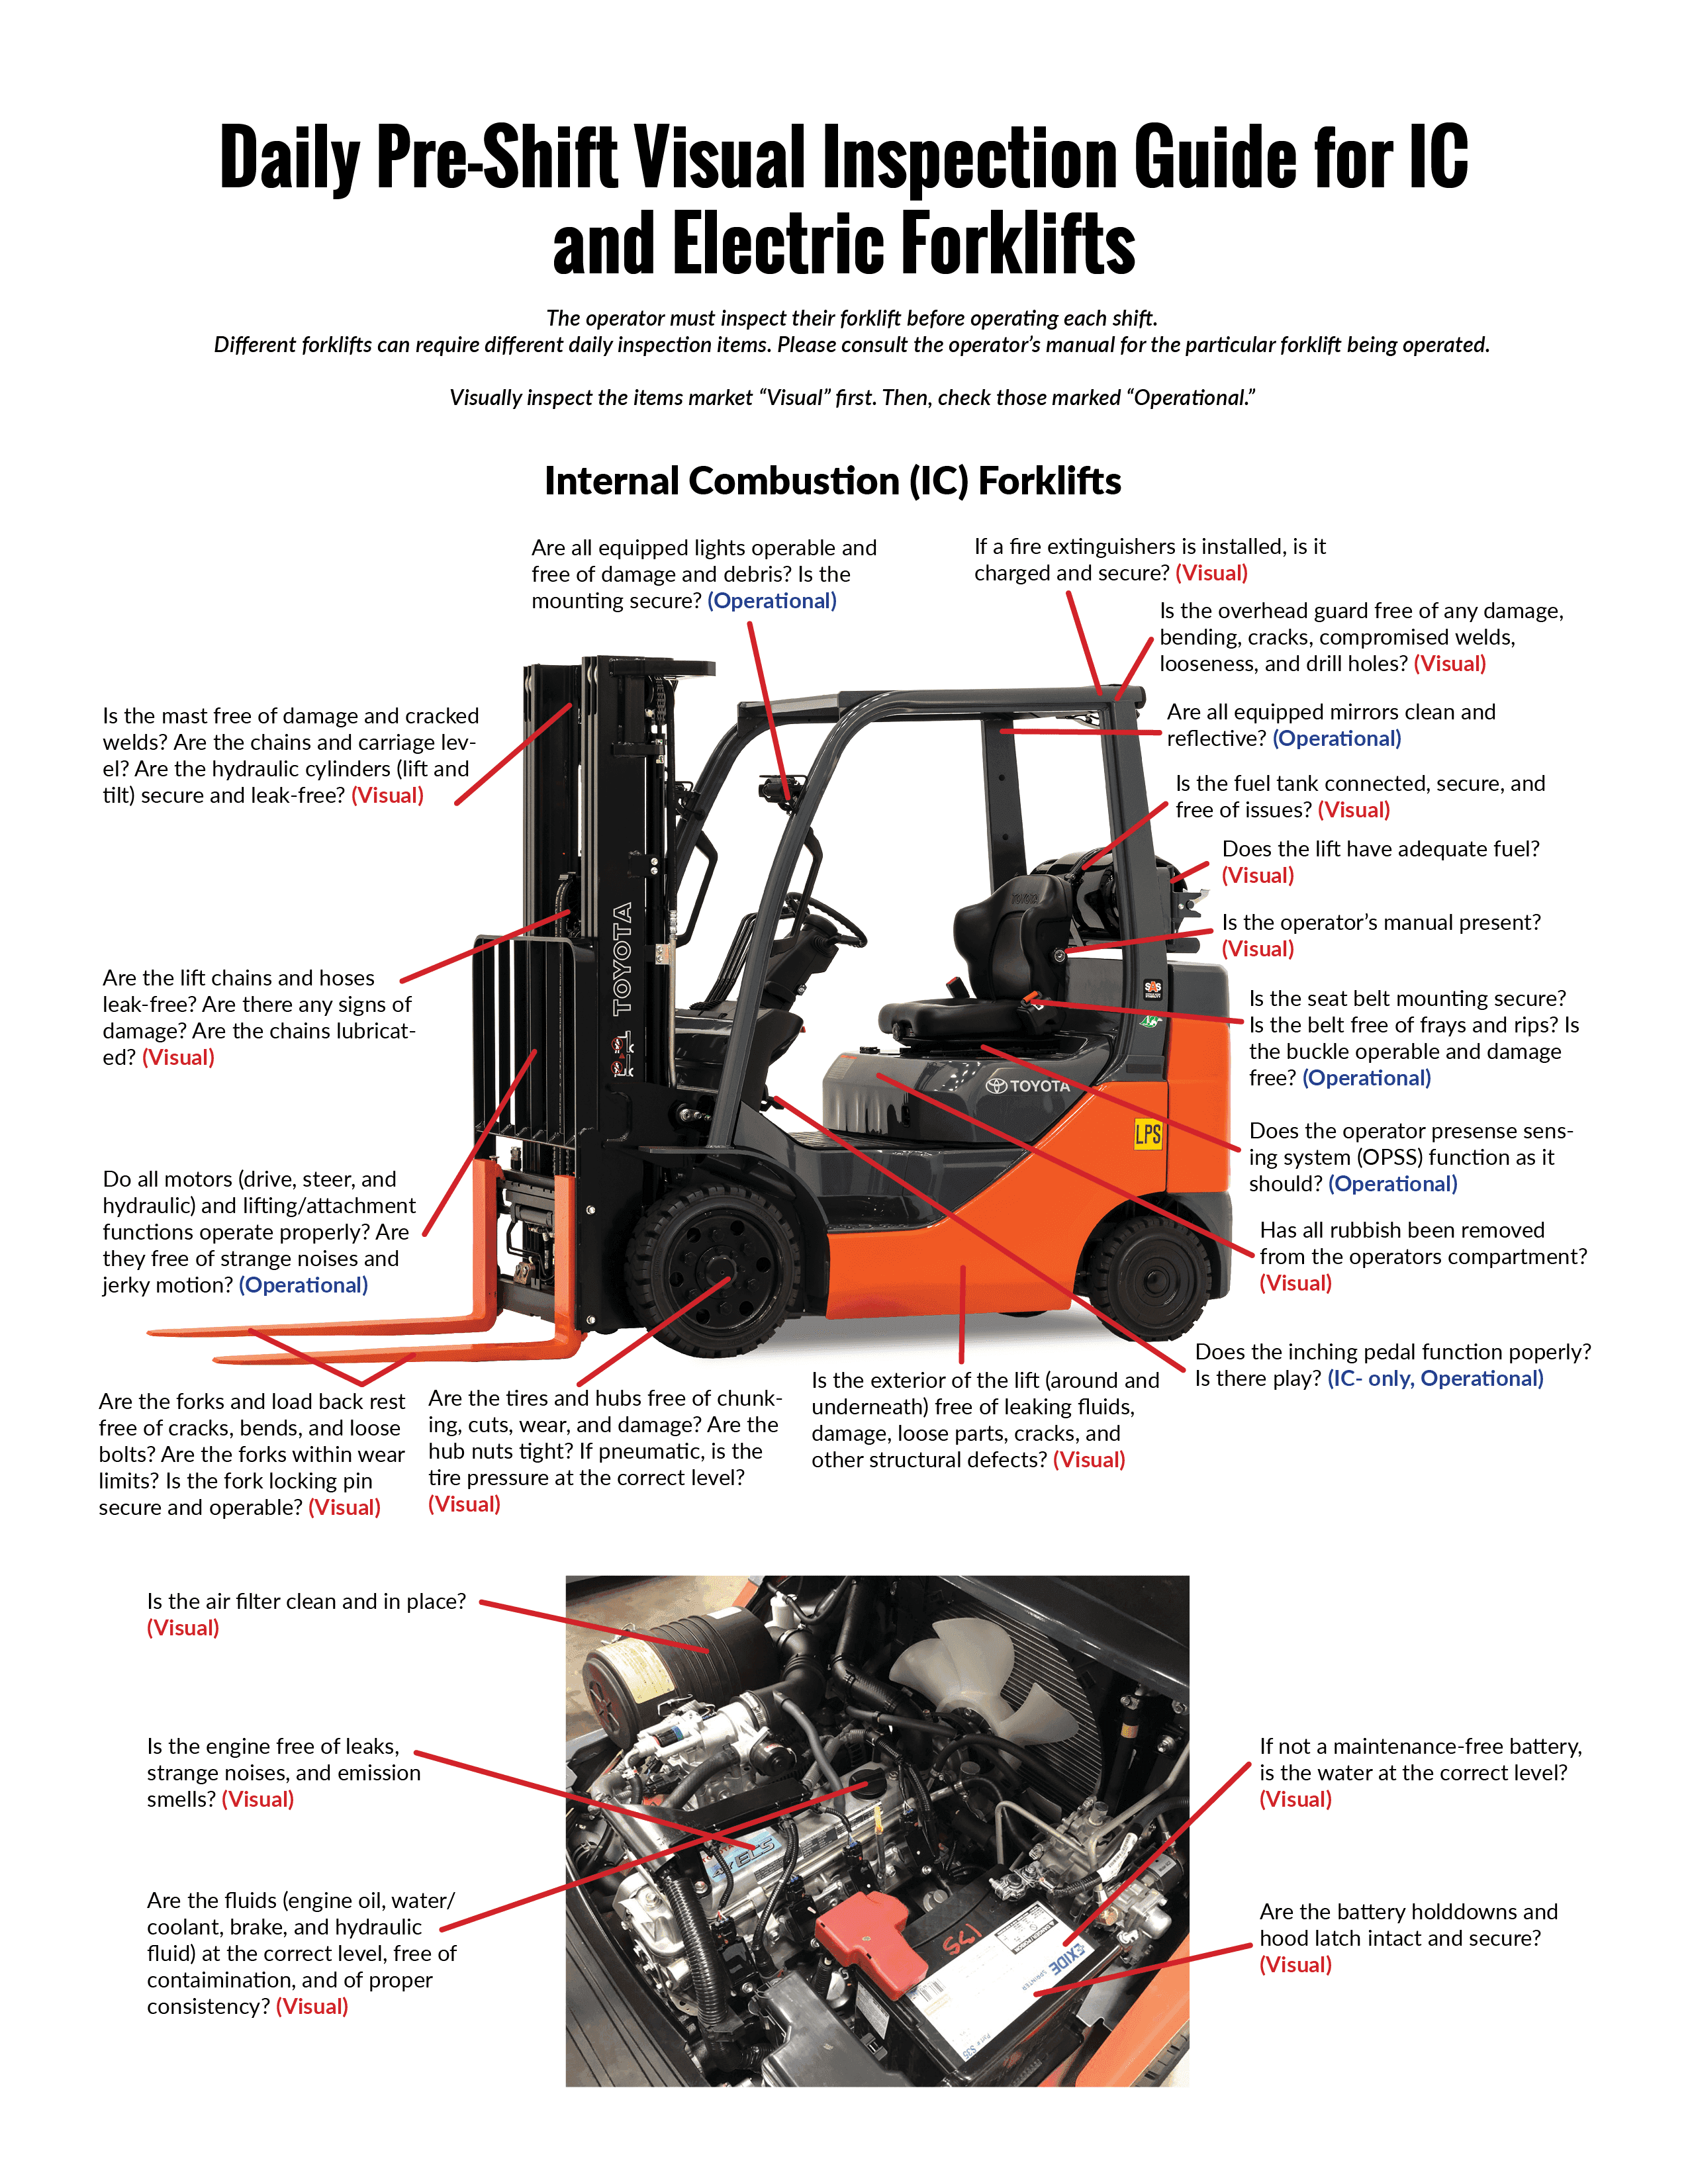 Forklift Maintenance Your Complete Guide To Maximizing Uptime Improving Safety And Saving Money